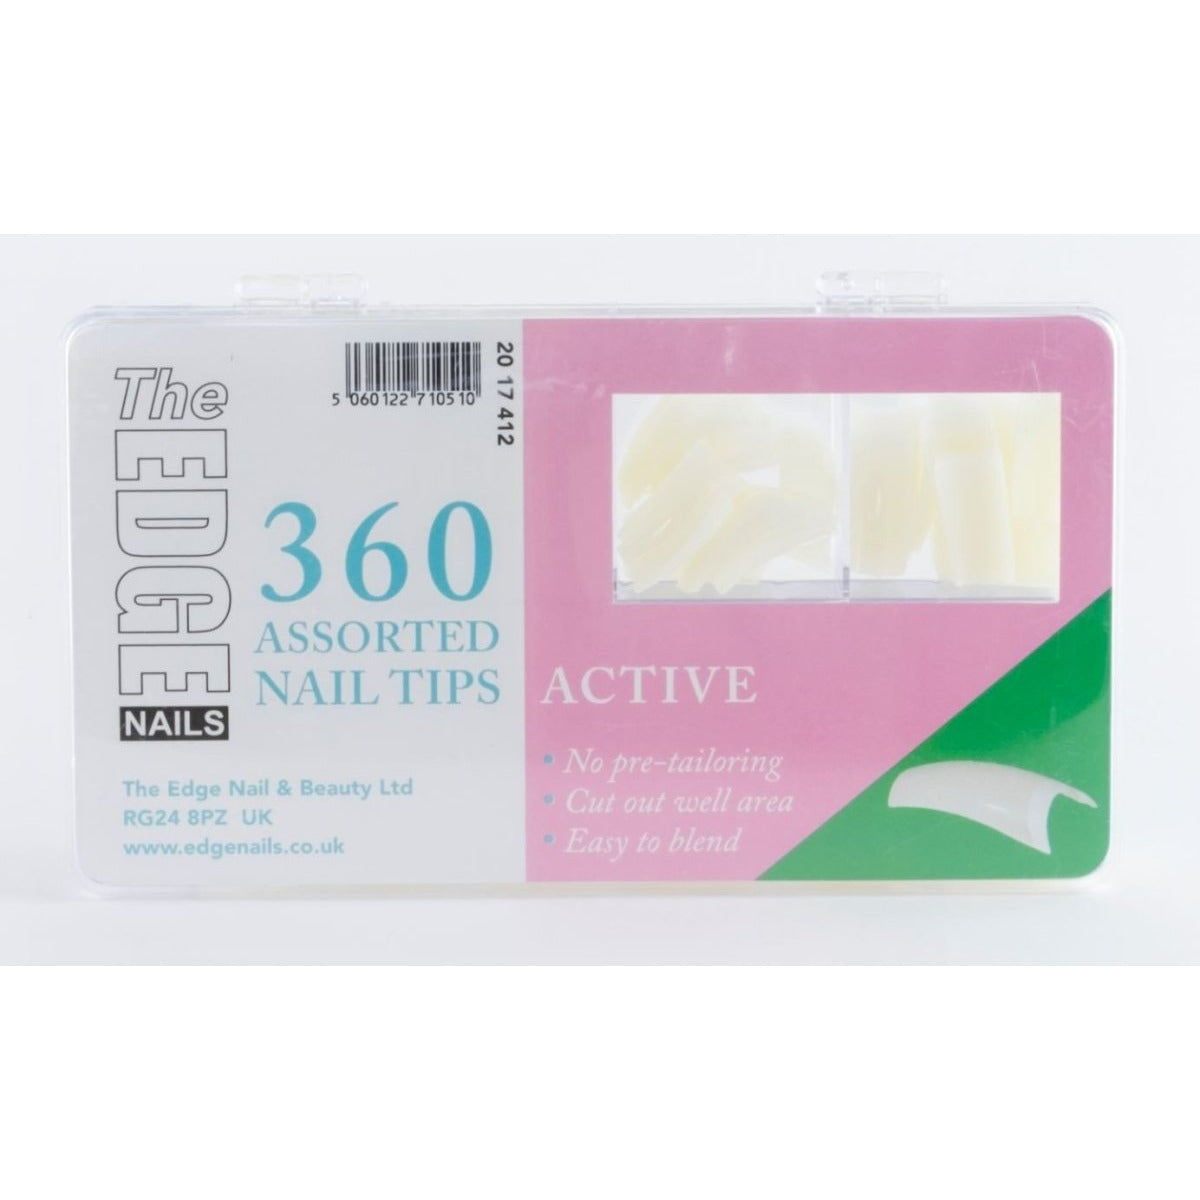 The Edge Active Nail Tips Box Of 360 Assorted Tips